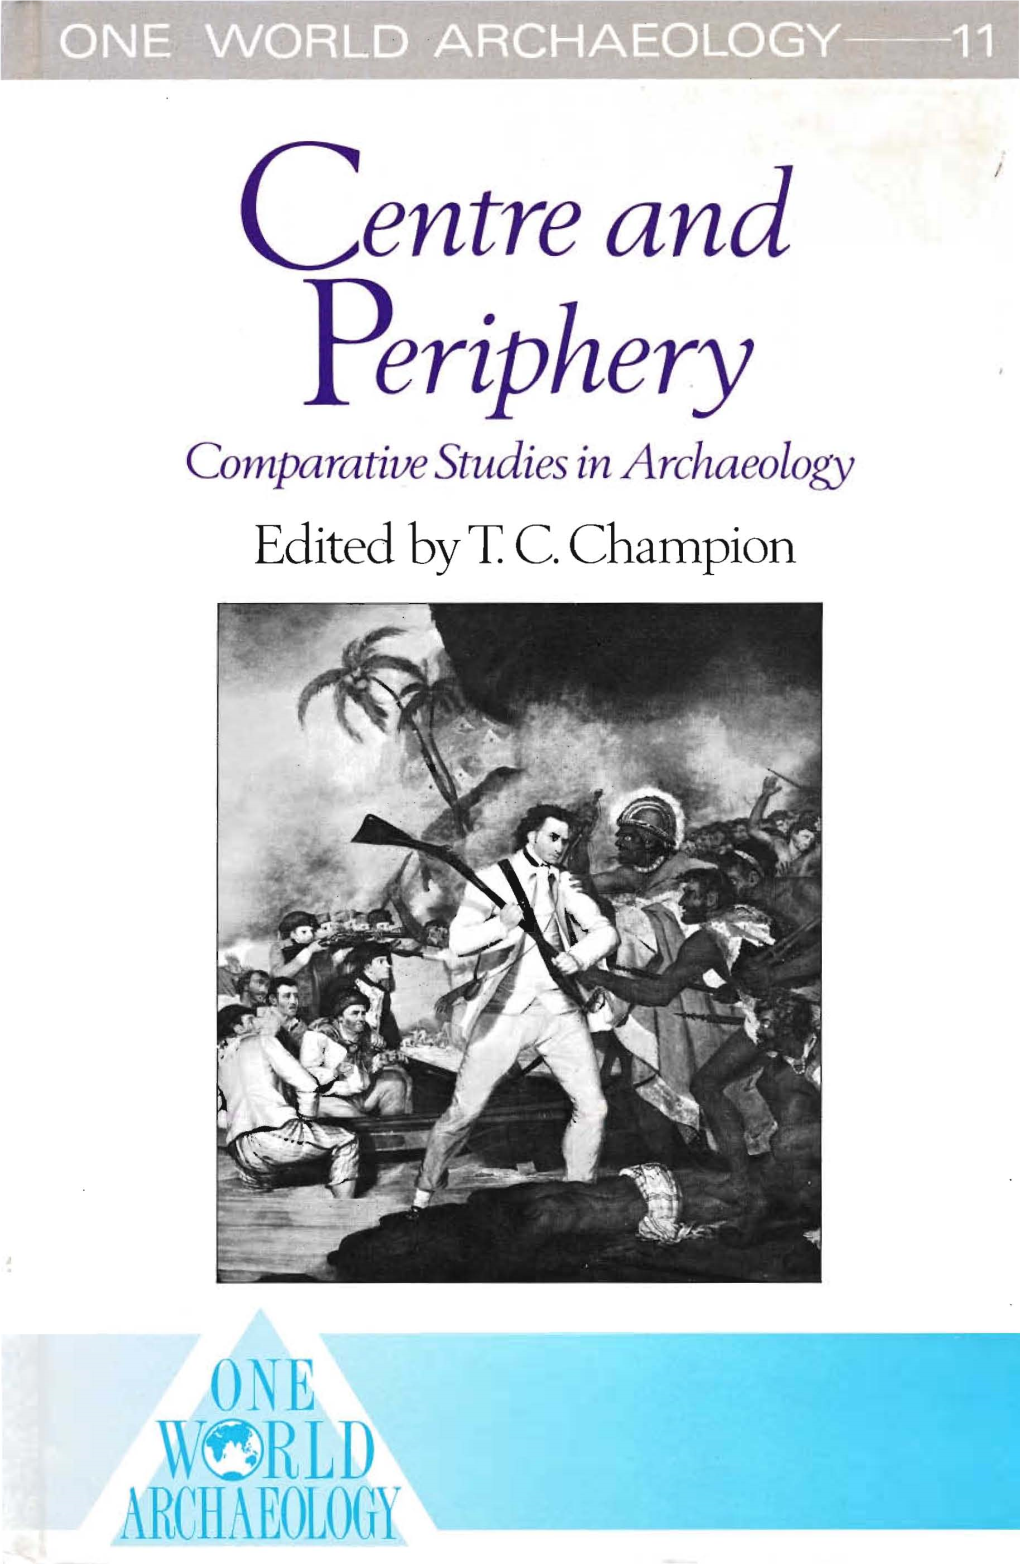 Archaeology Edited by T C